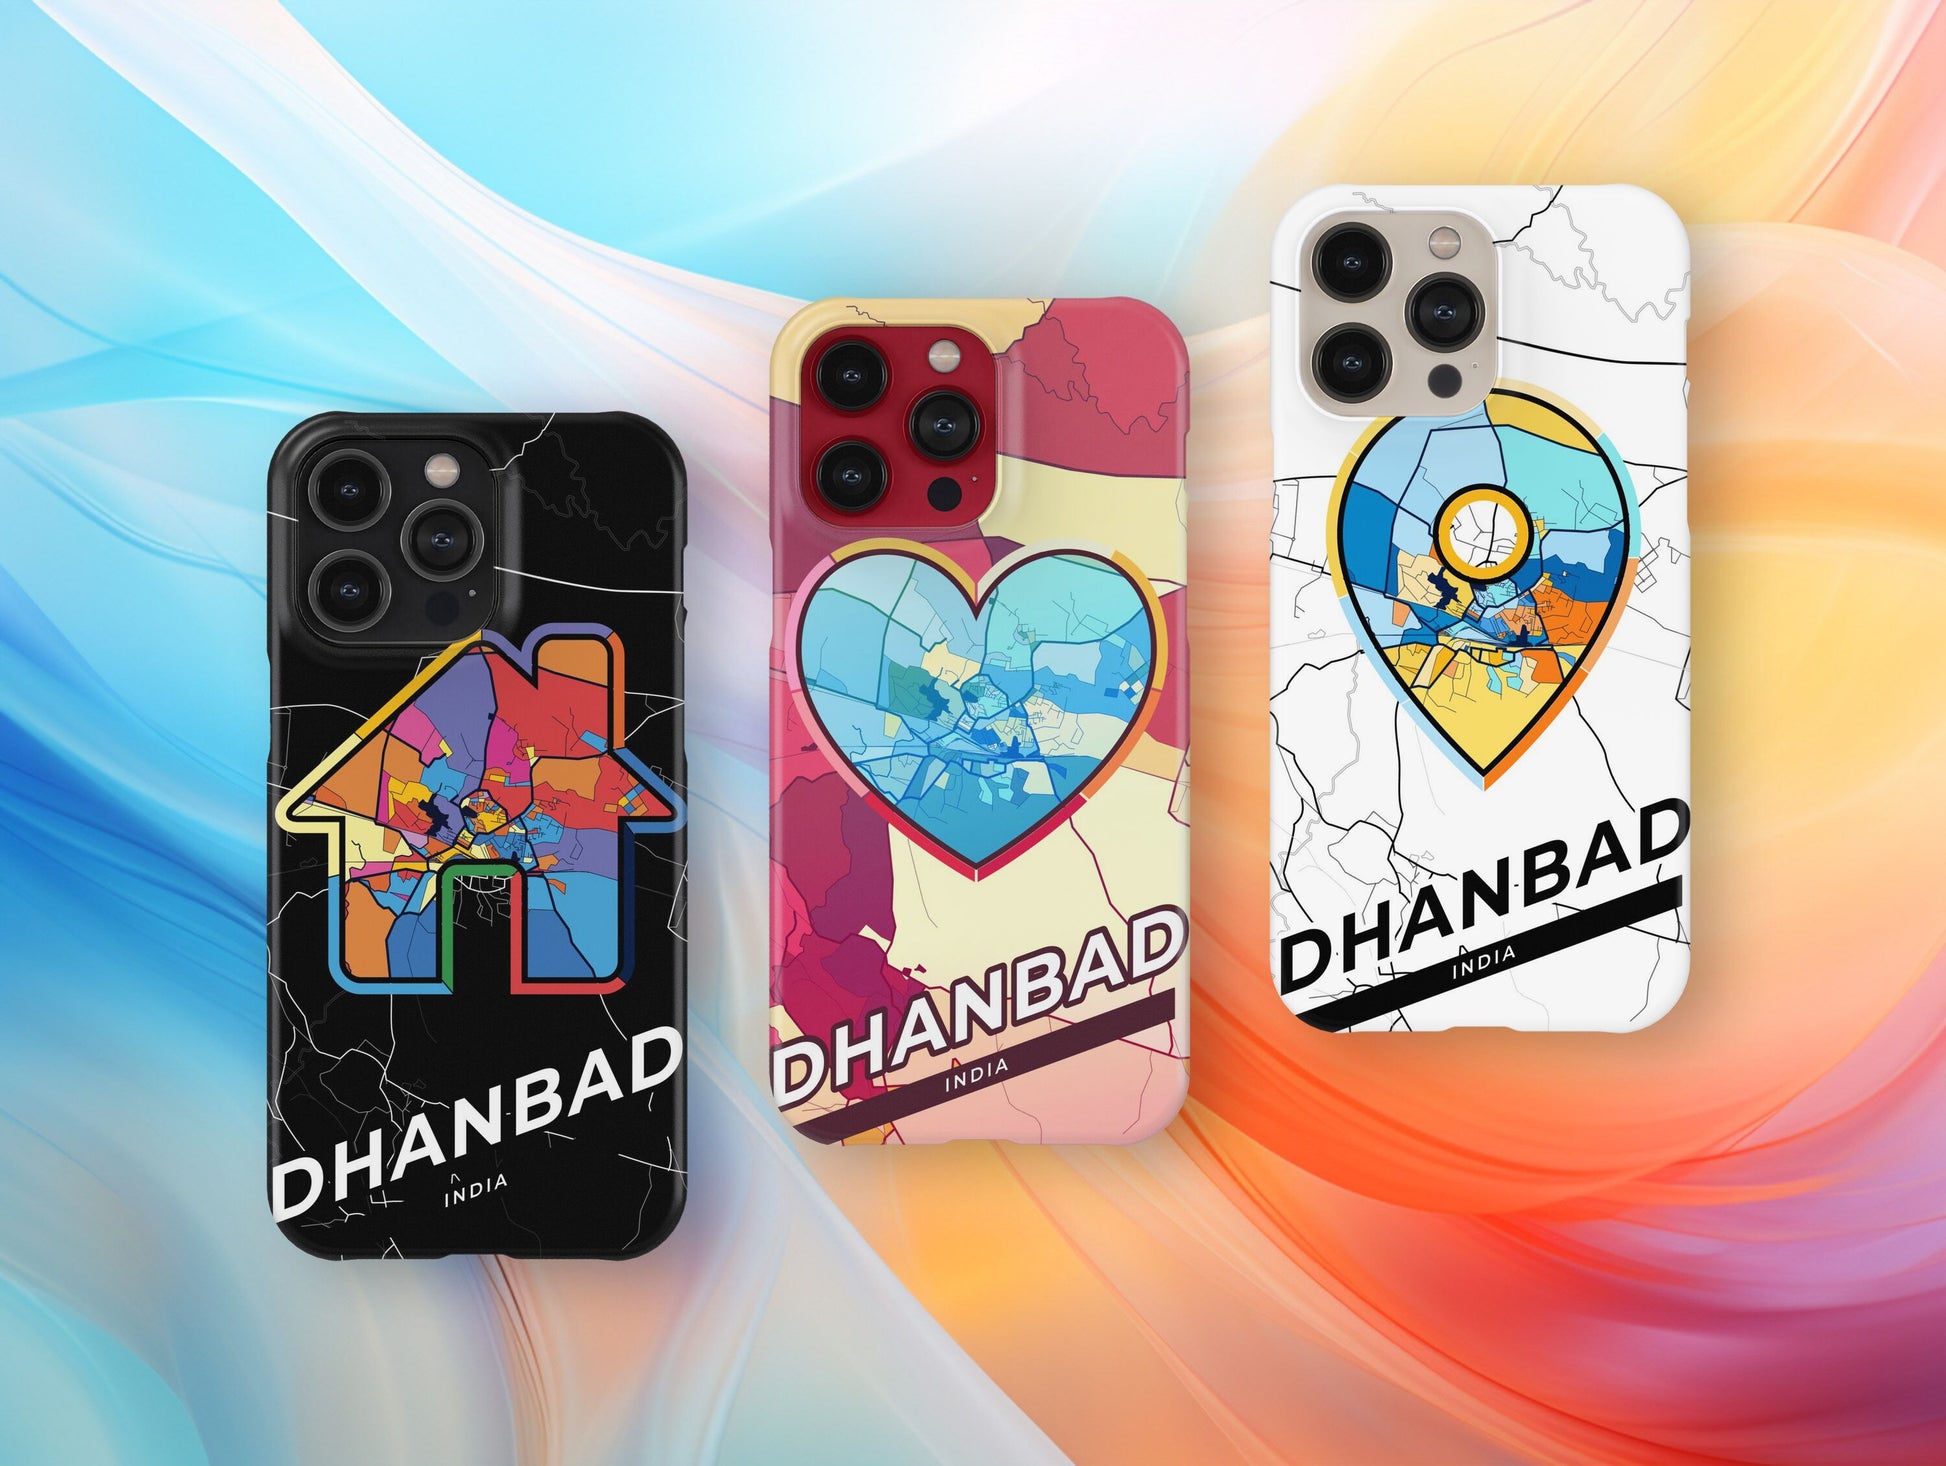 Dhanbad India slim phone case with colorful icon. Birthday, wedding or housewarming gift. Couple match cases.